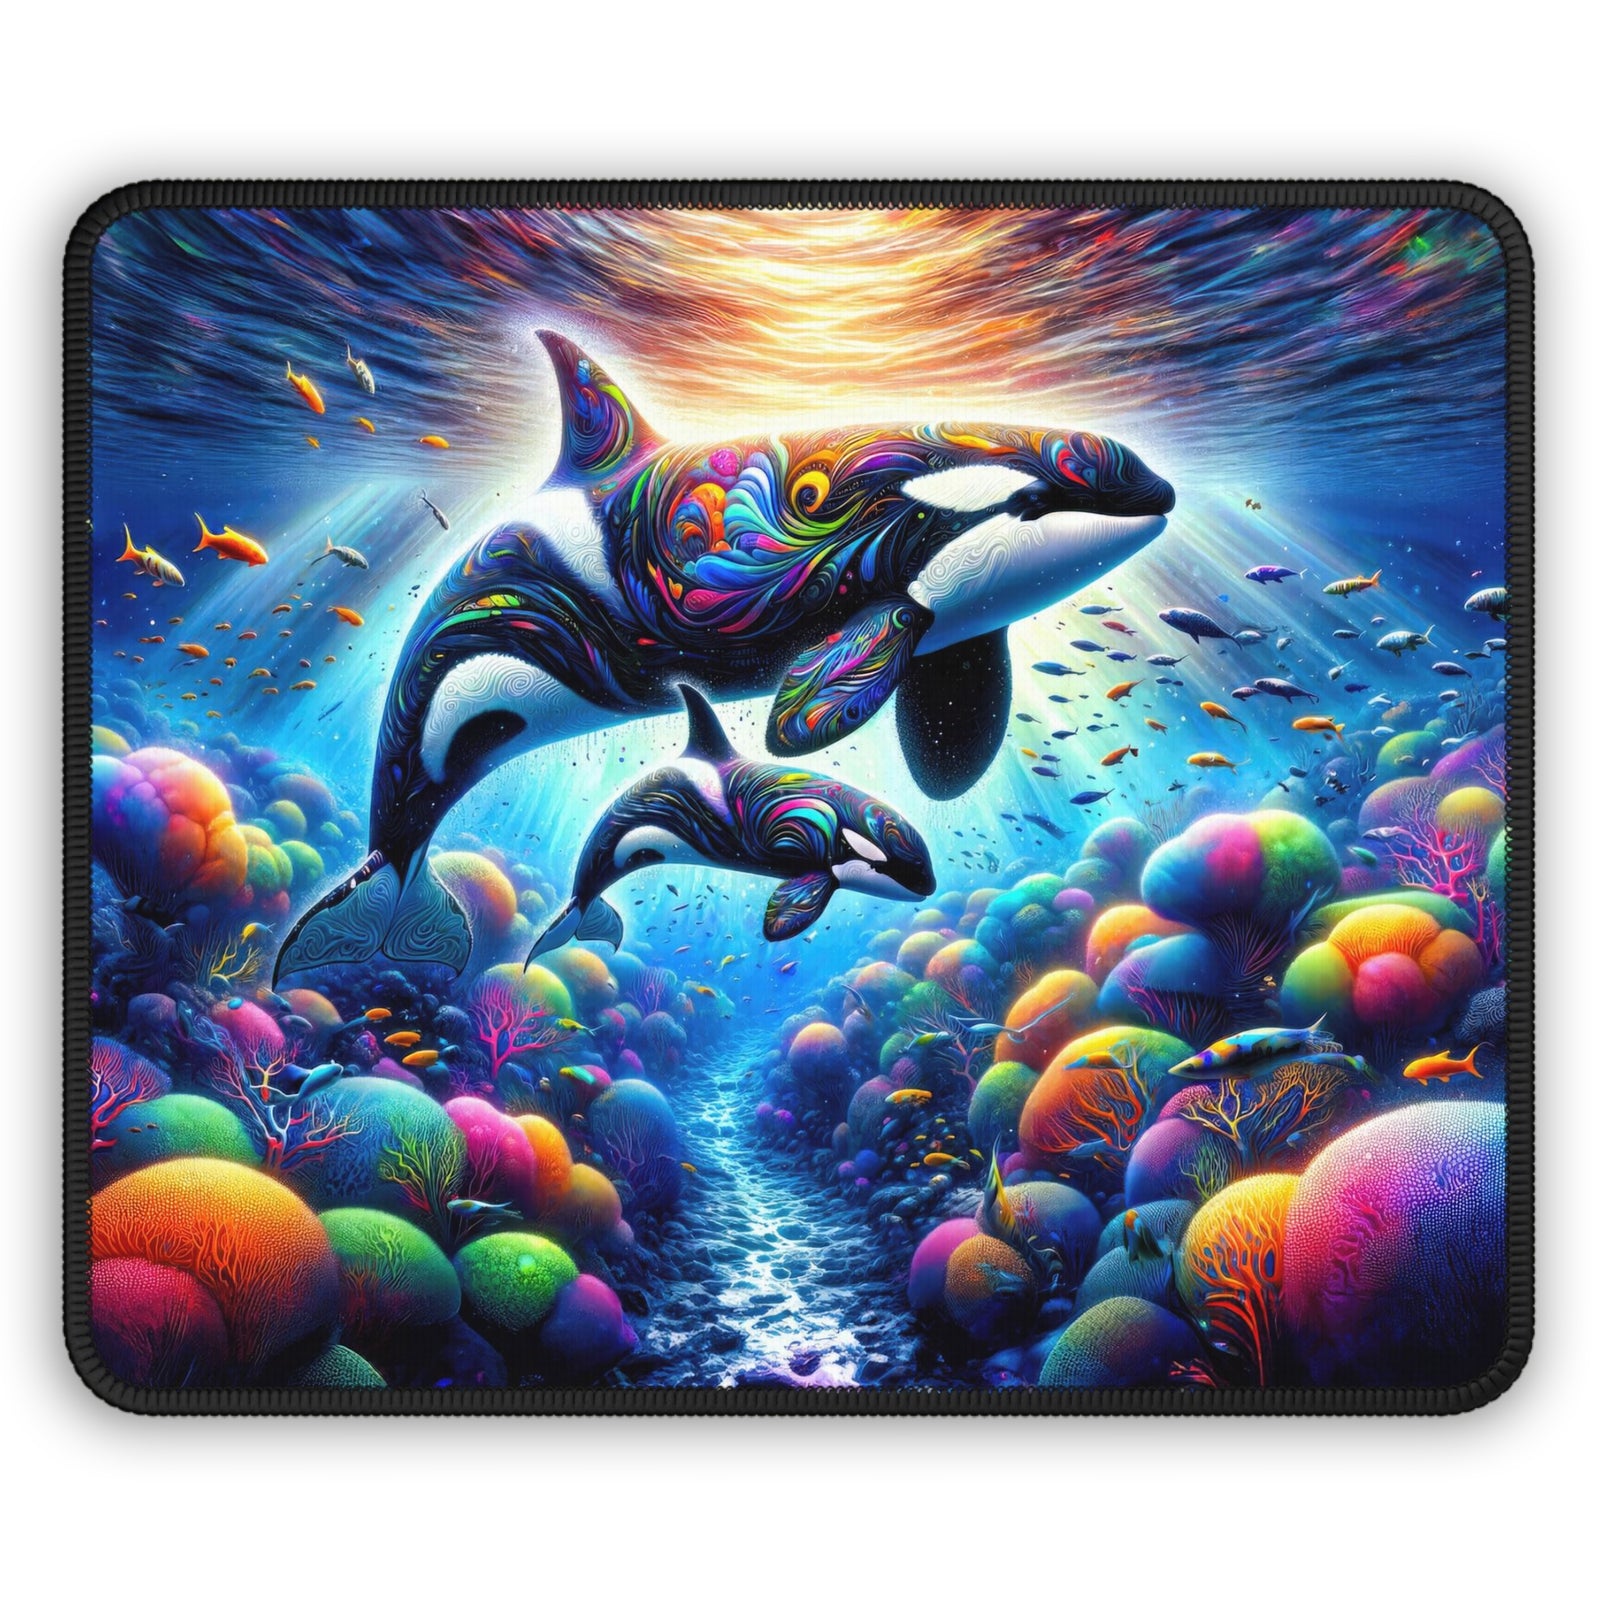 Lullaby of the Luminous Depths Gaming Mouse Pad